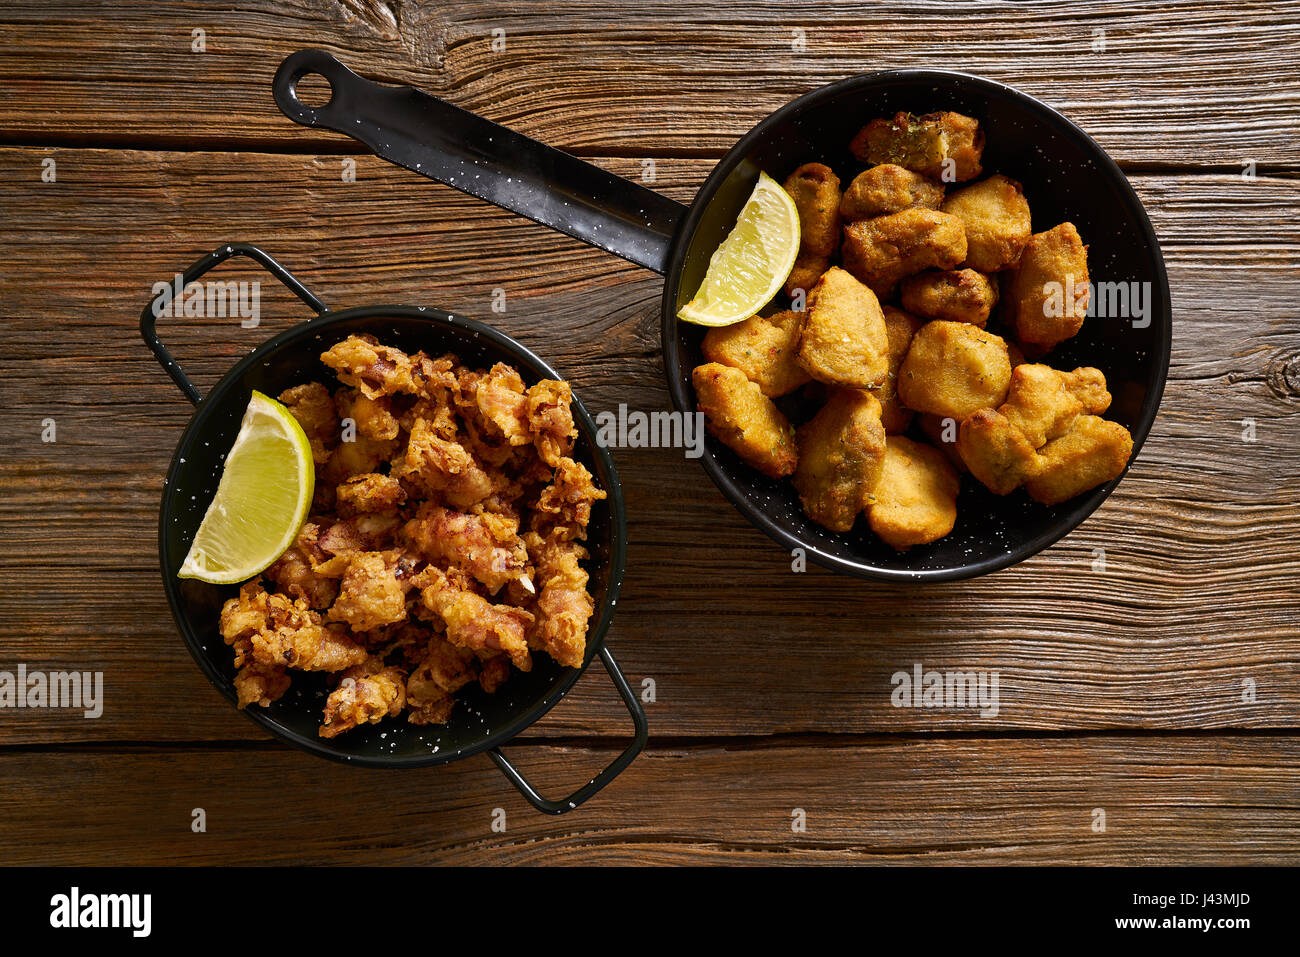 Tapas Adobo fried fish and puntilla skid breaded from Spain Stock Photo